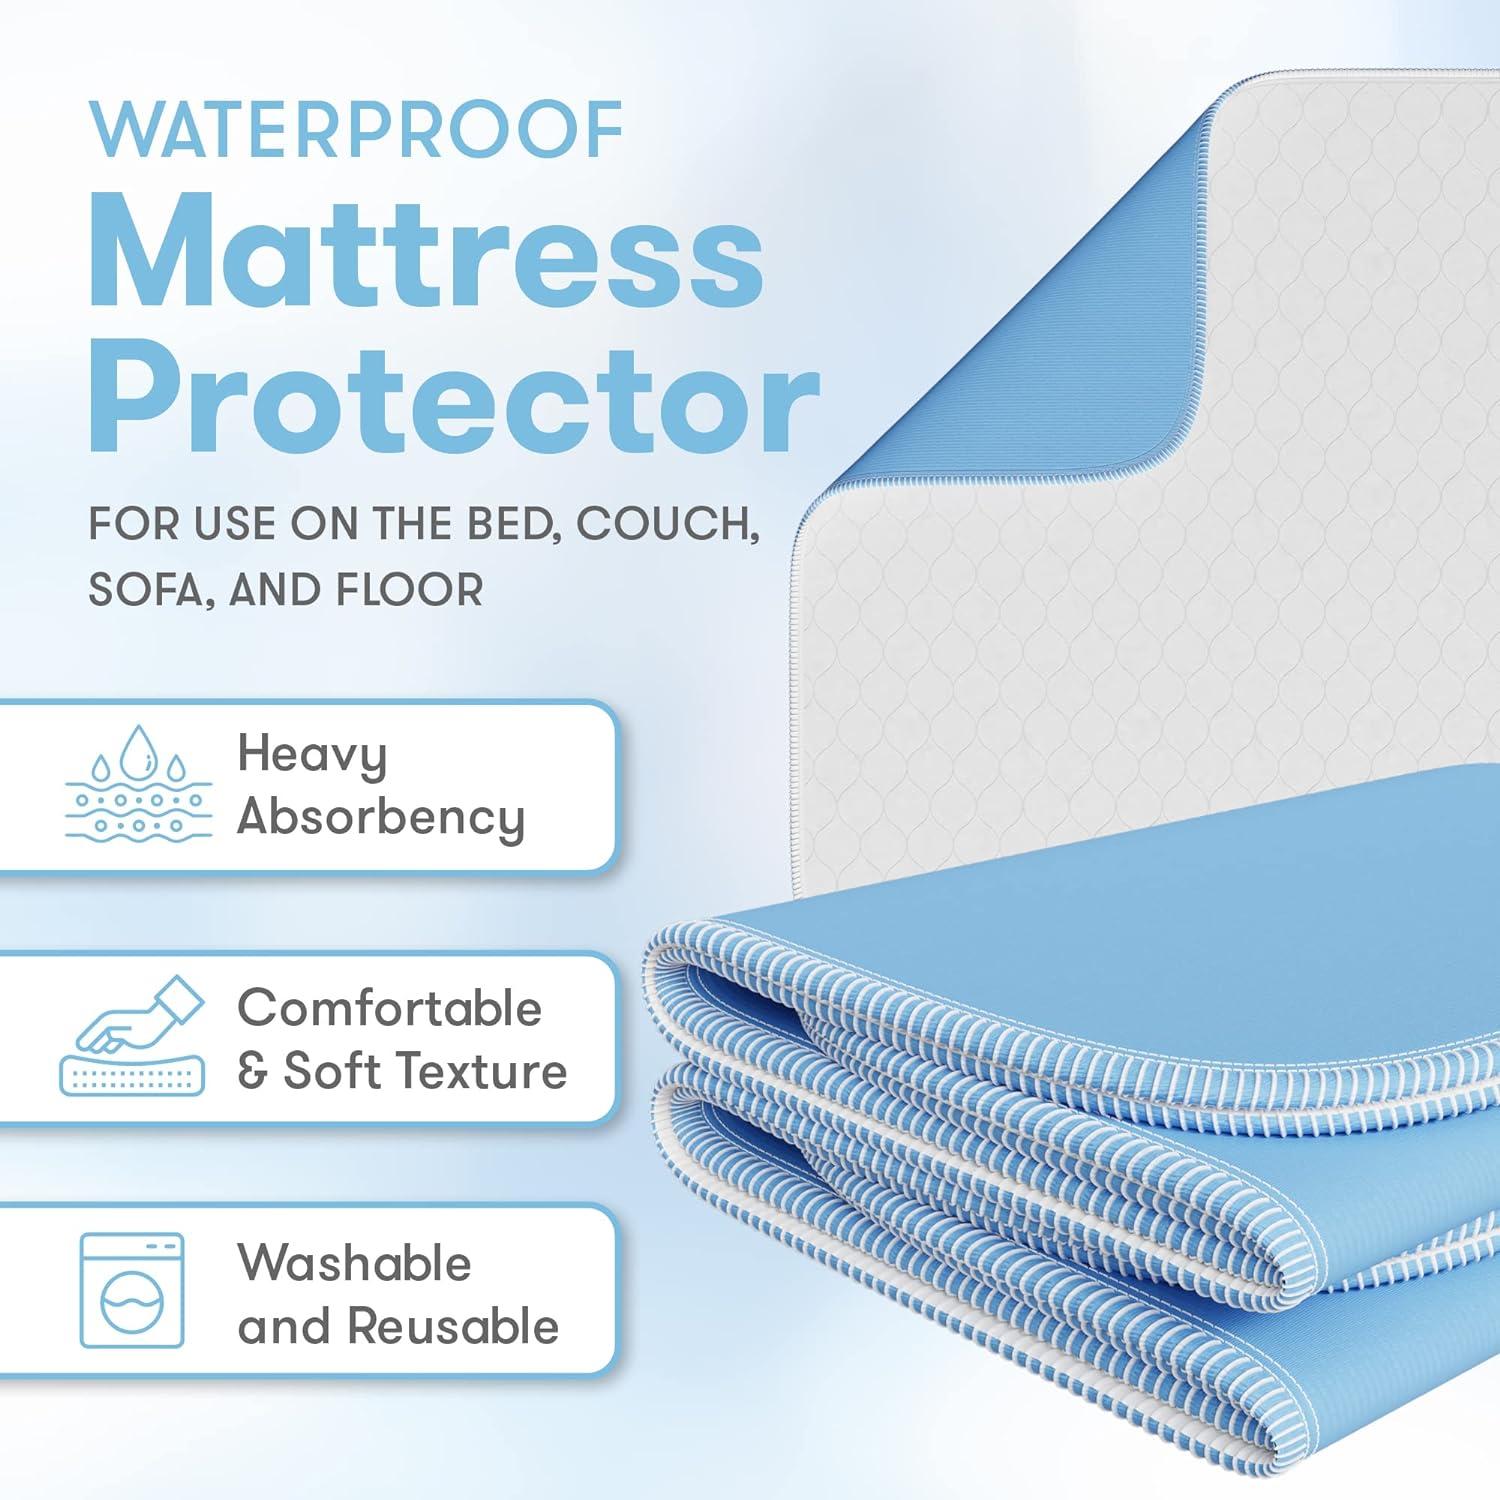 Washable Bed Pads Waterproof - 4 Pack 34 x 36 Reusable Underpads  Incontinence Chucks Pad Blue and White Pee Pads for Adults Anti Slip Sheet  Protector for Adults Elderly Kids Toddler and Pets